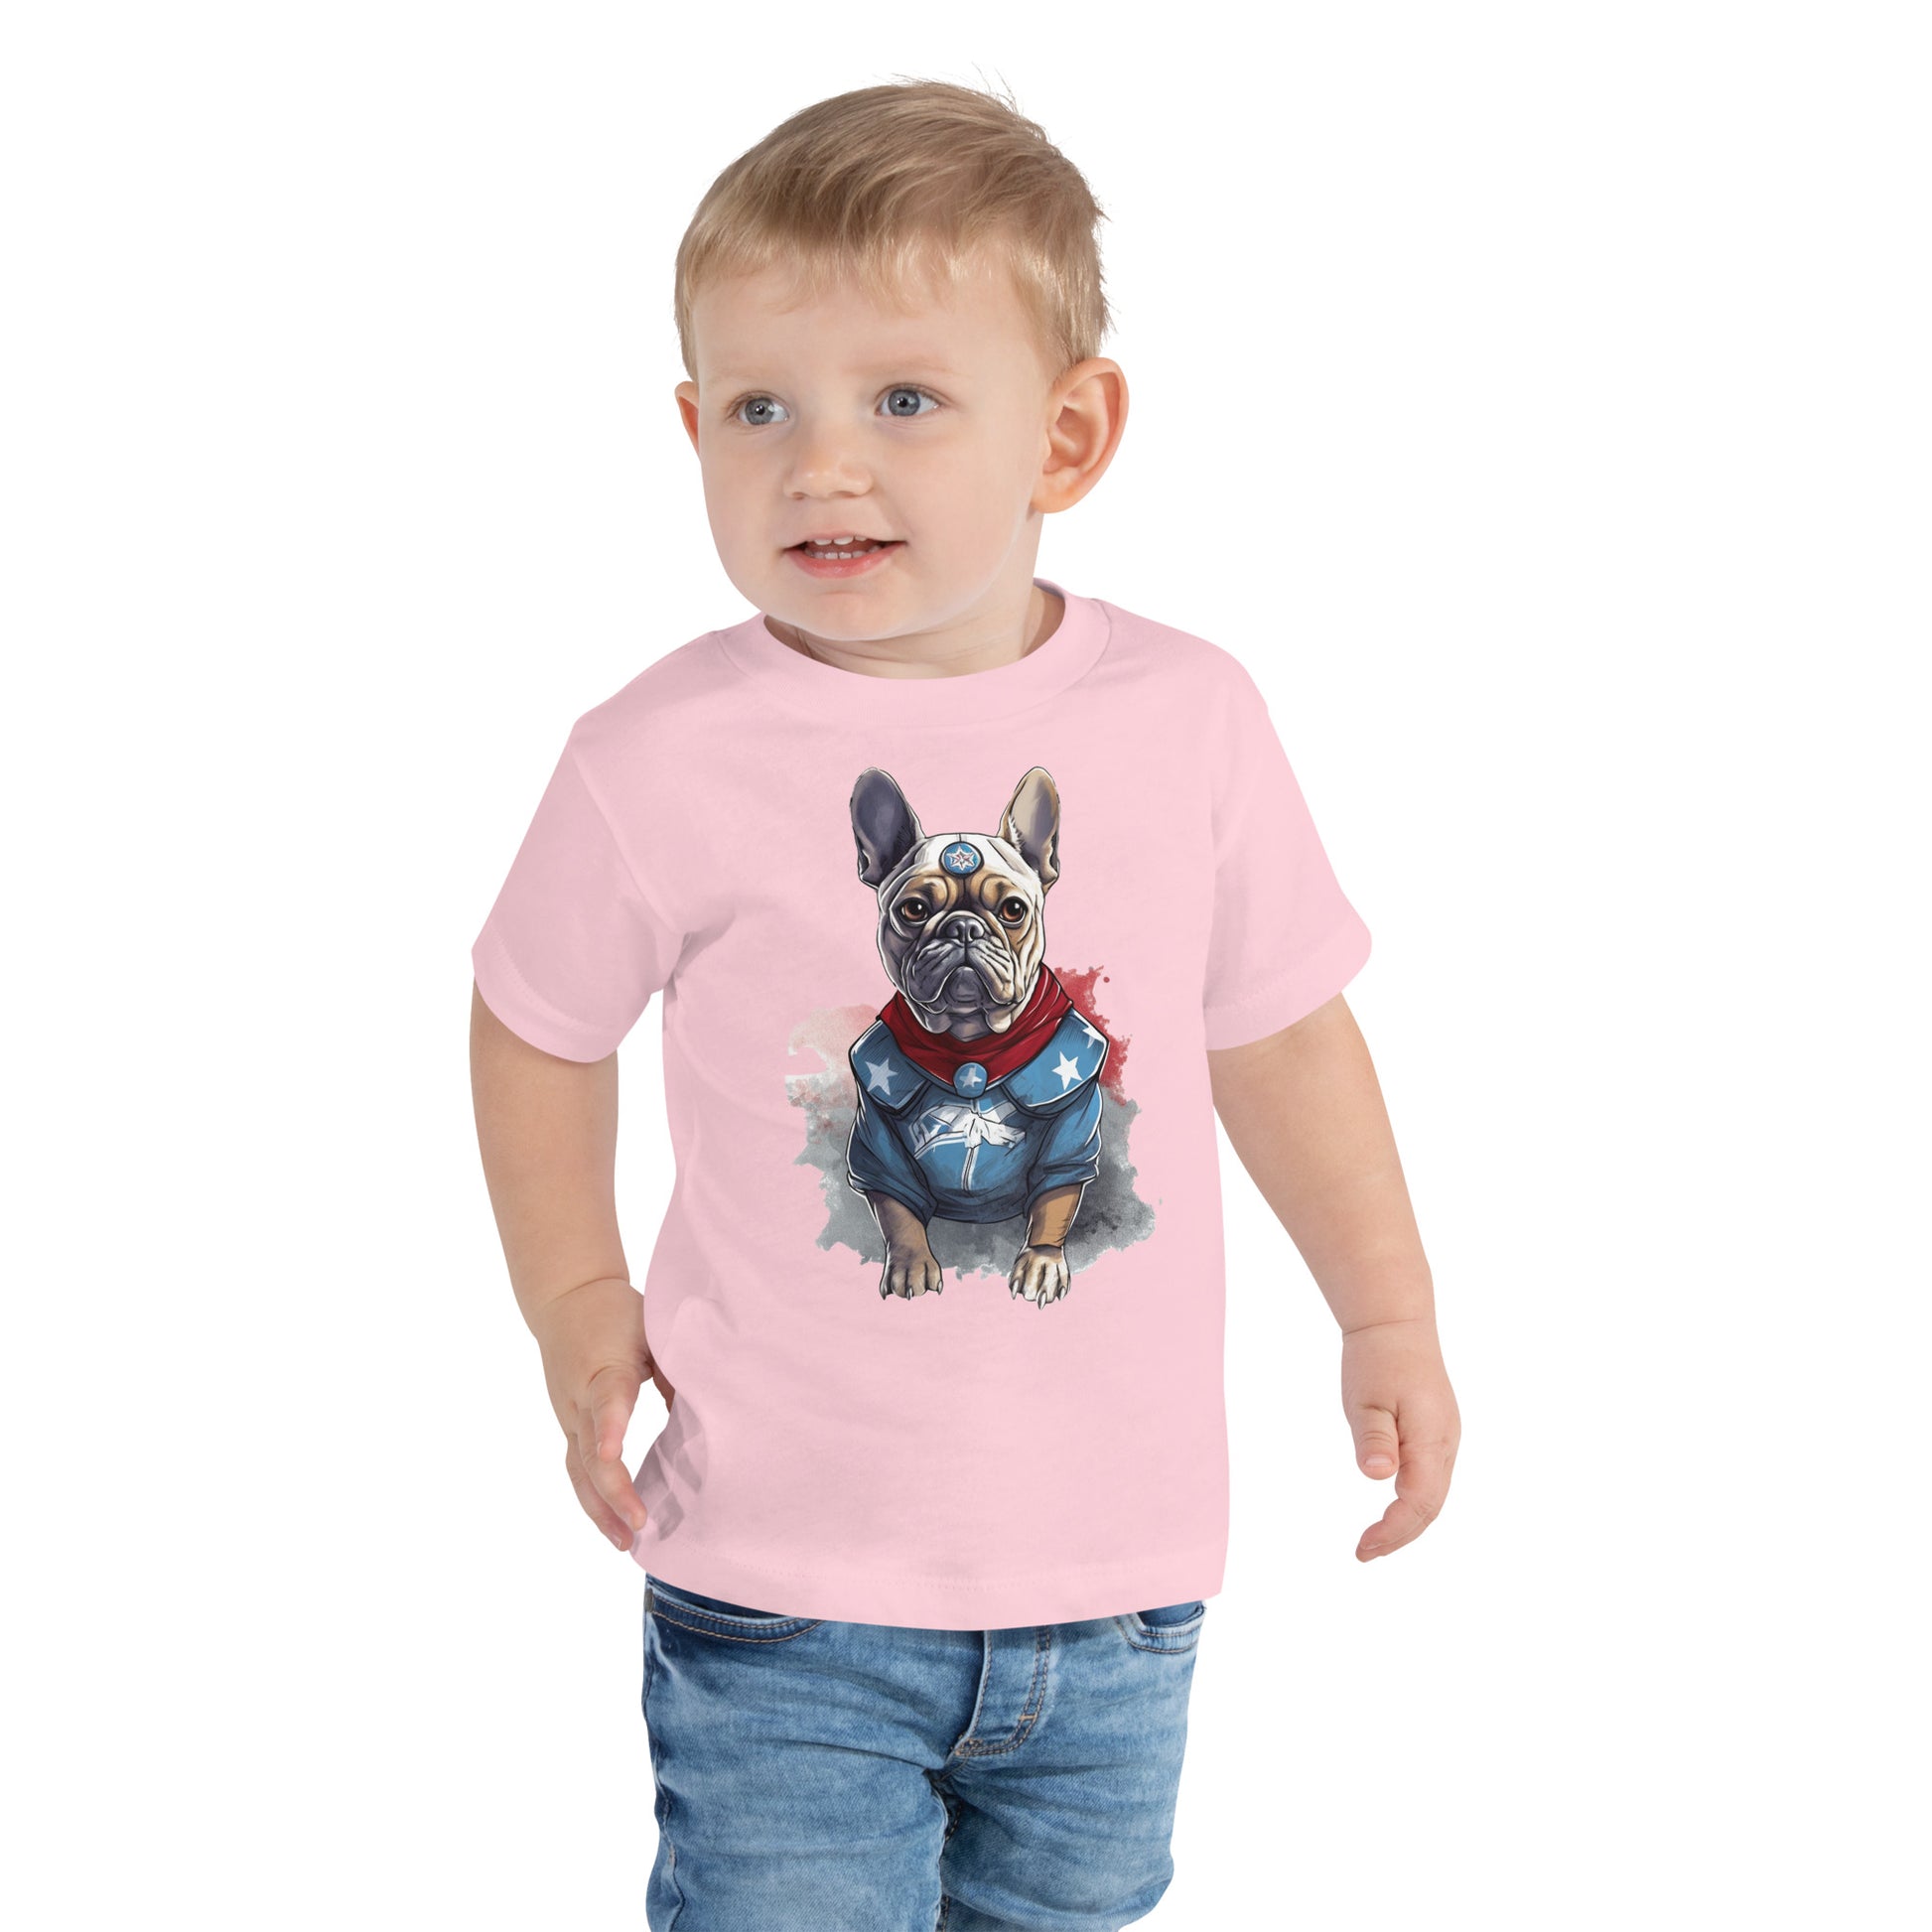 Adorable Kids' Frenchie T-Shirt: Trendy and Stylish for Little Fashionistas